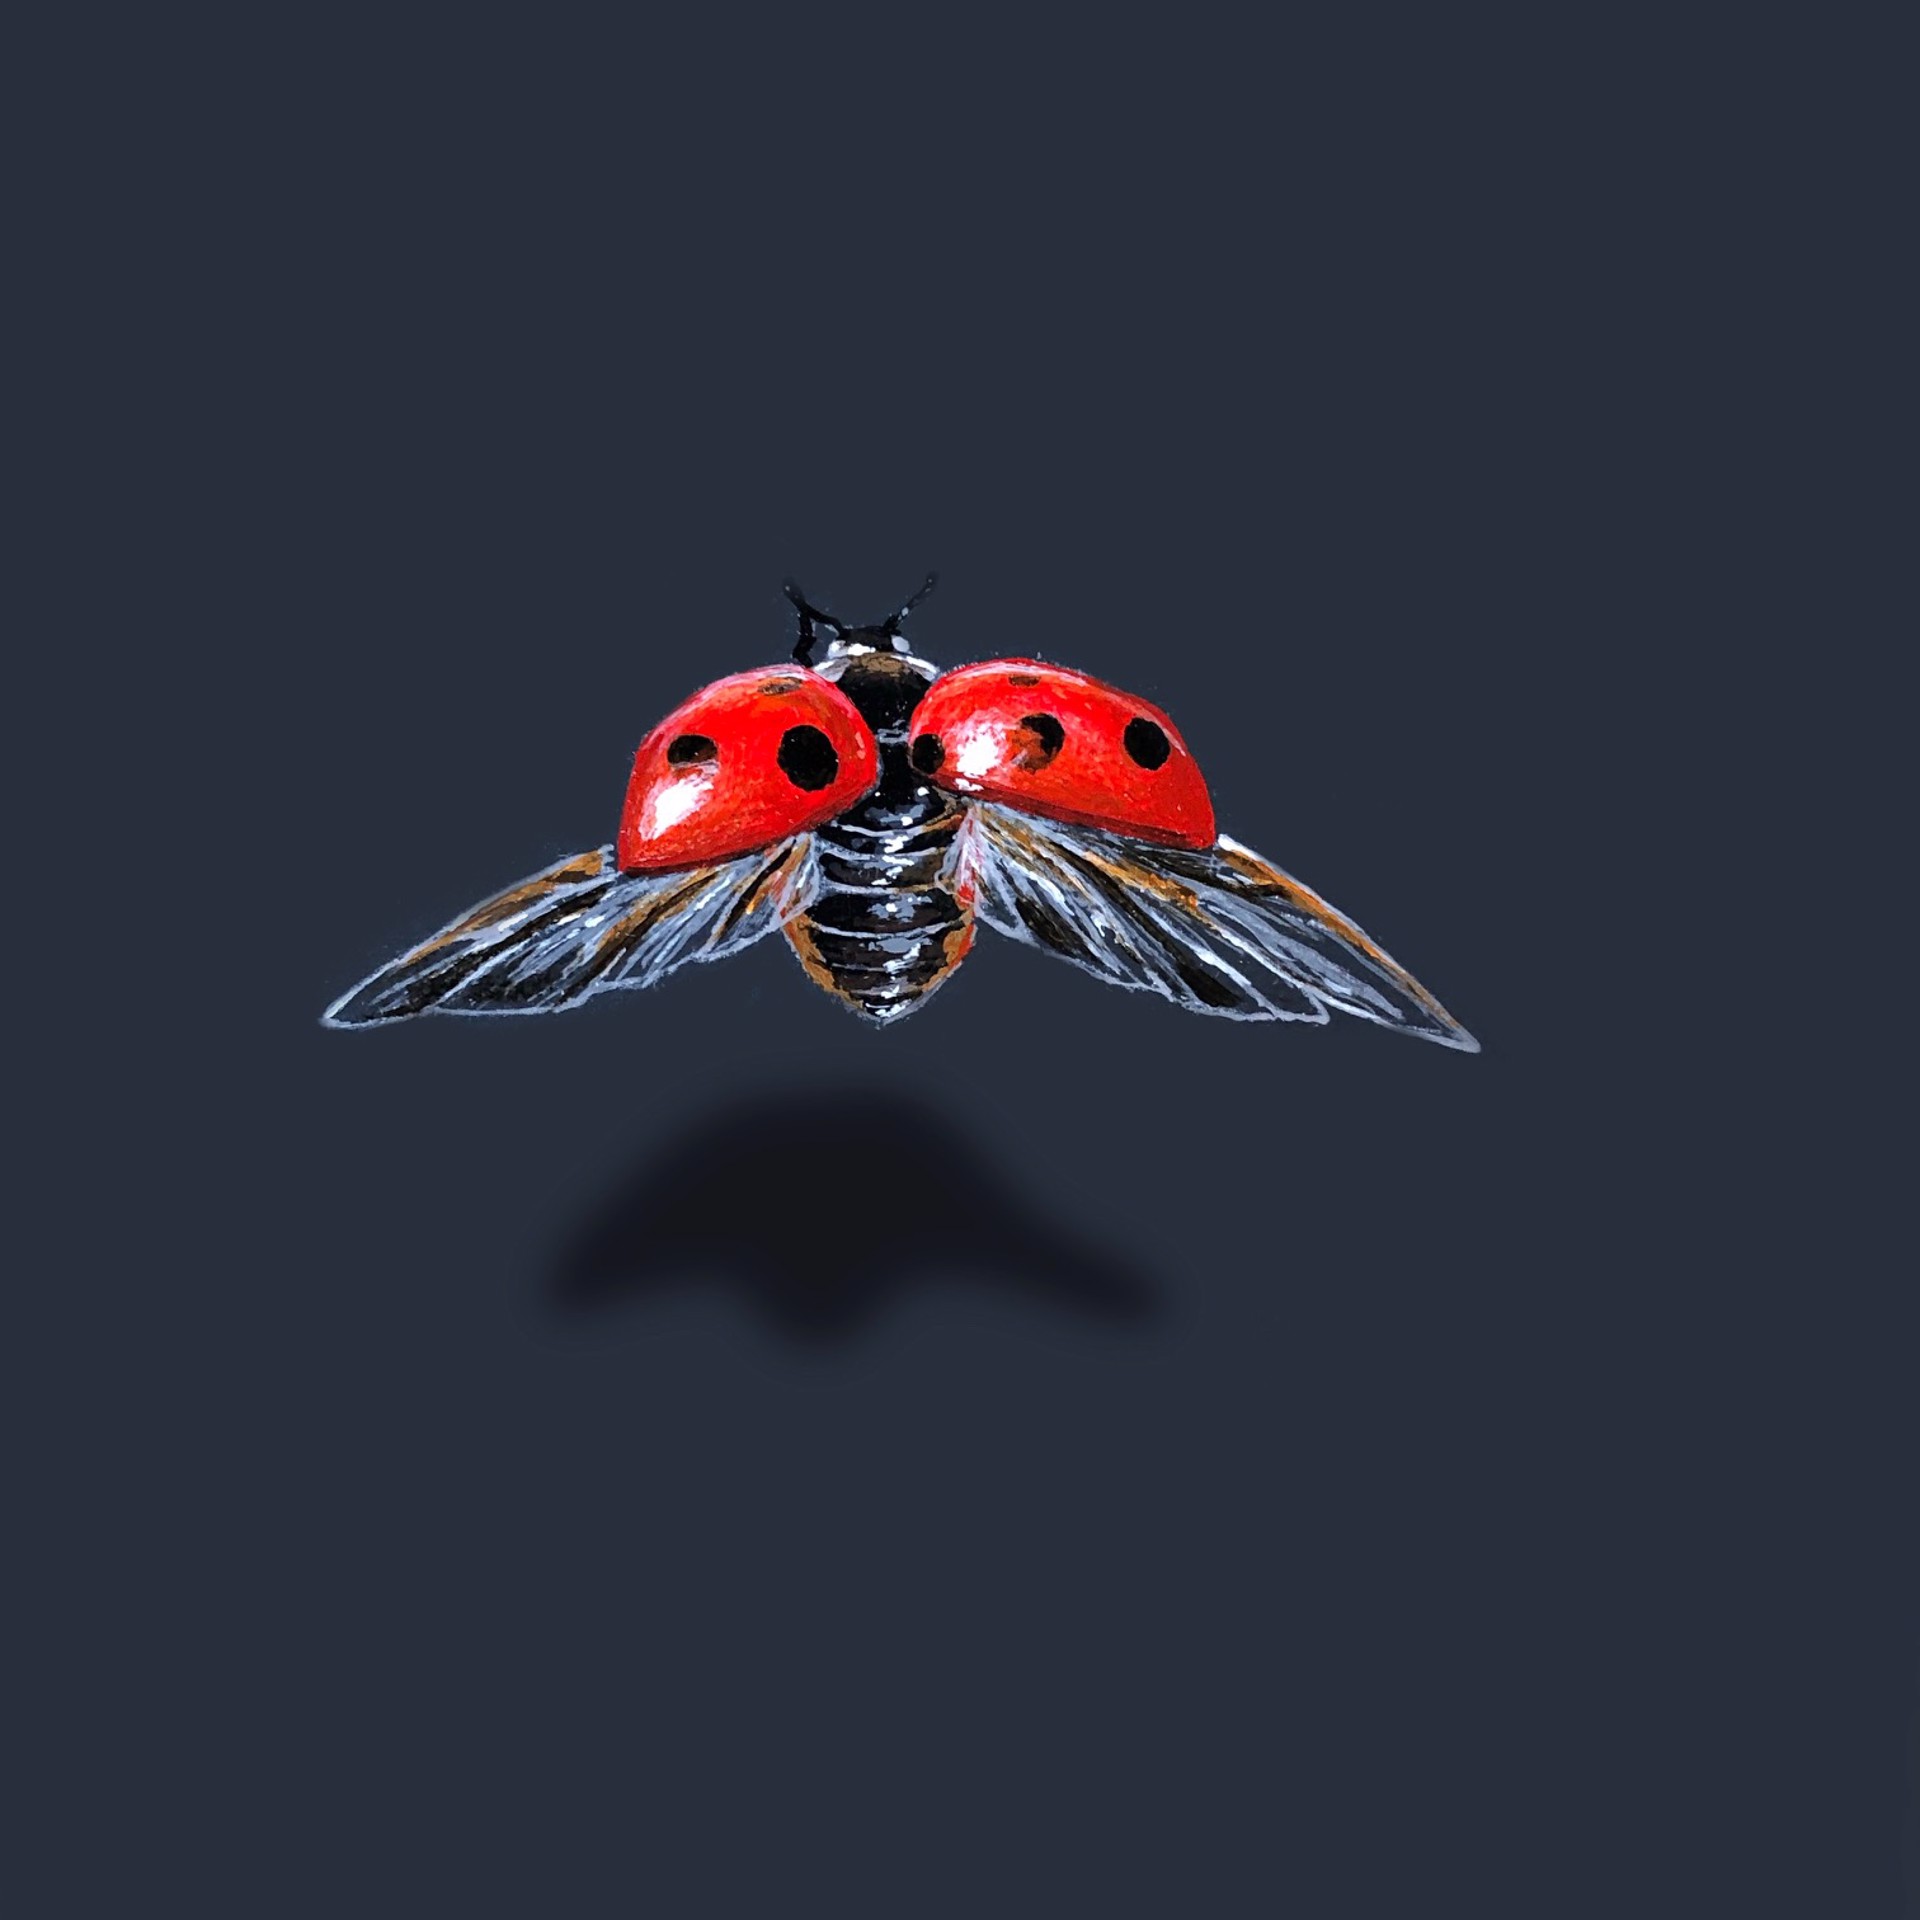 Queen Lady Bug by Anthony Deon